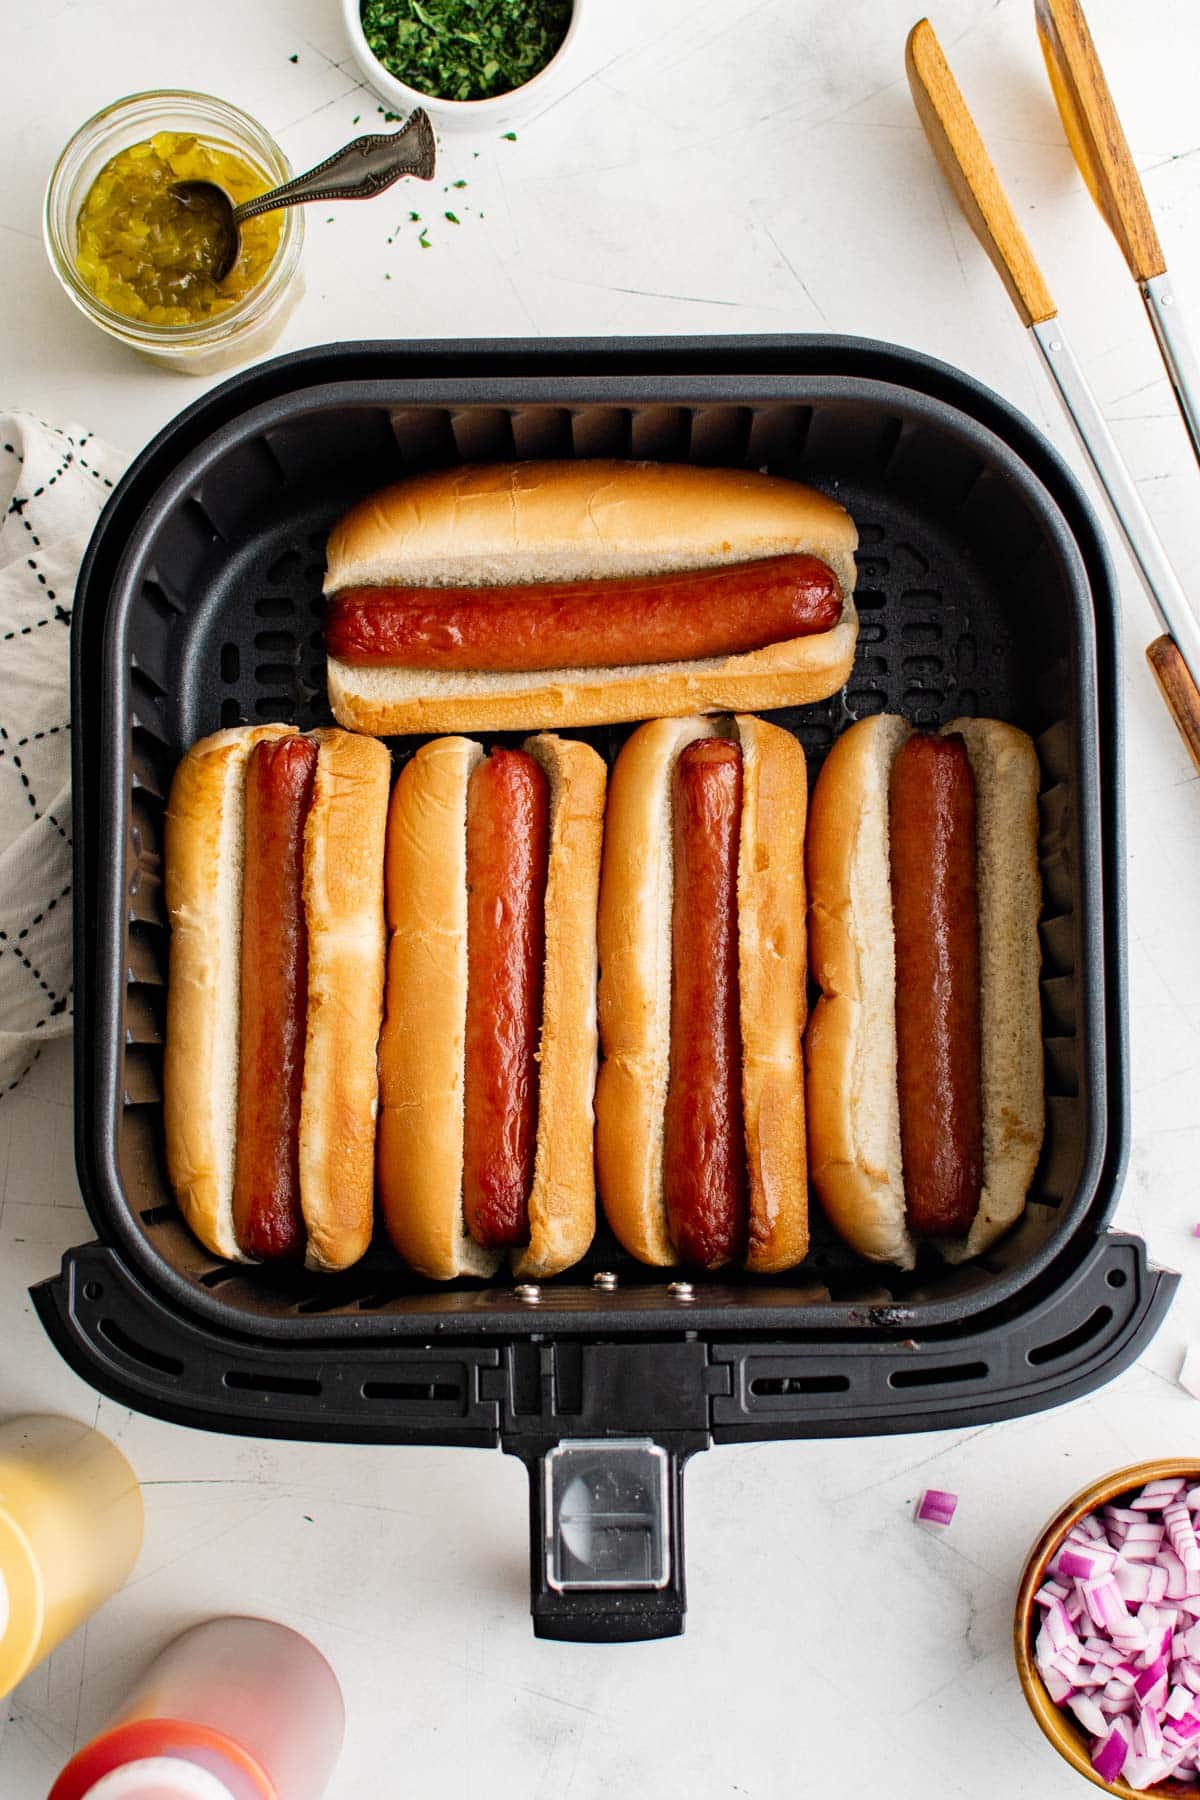 How Long Hot Dogs In Air Fryer